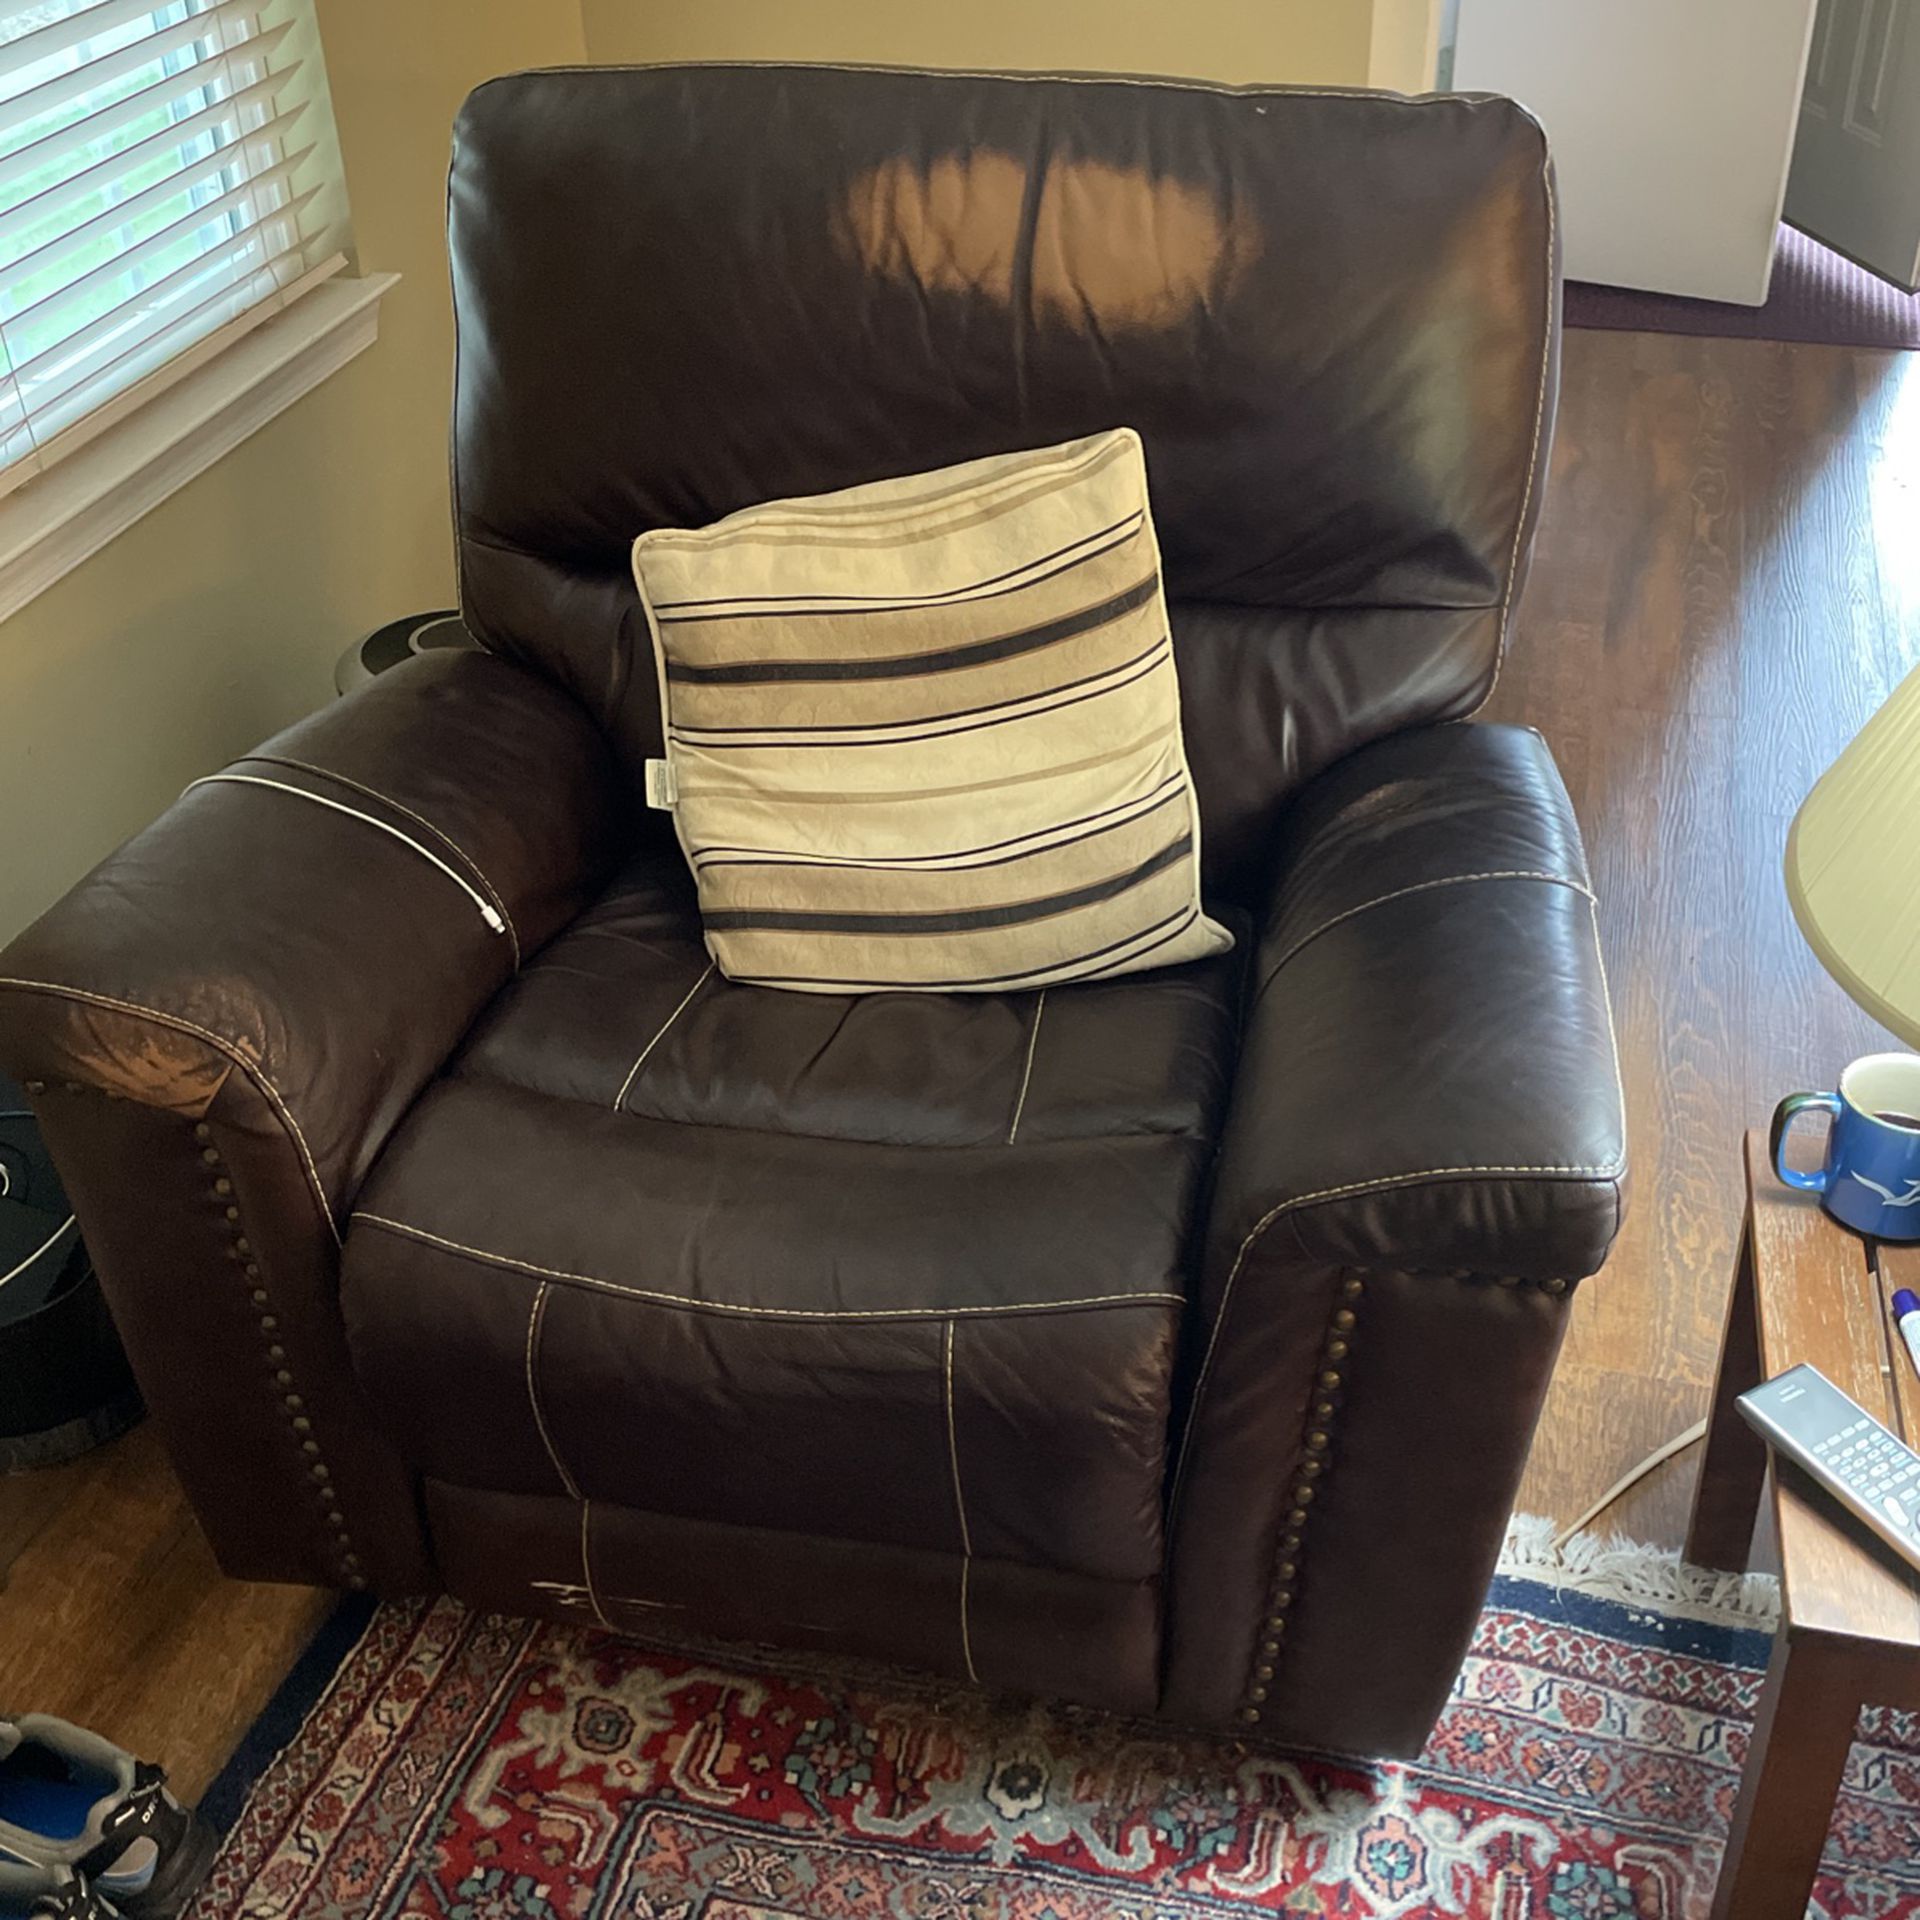 Two Recliners That Will Not Stay Reclined